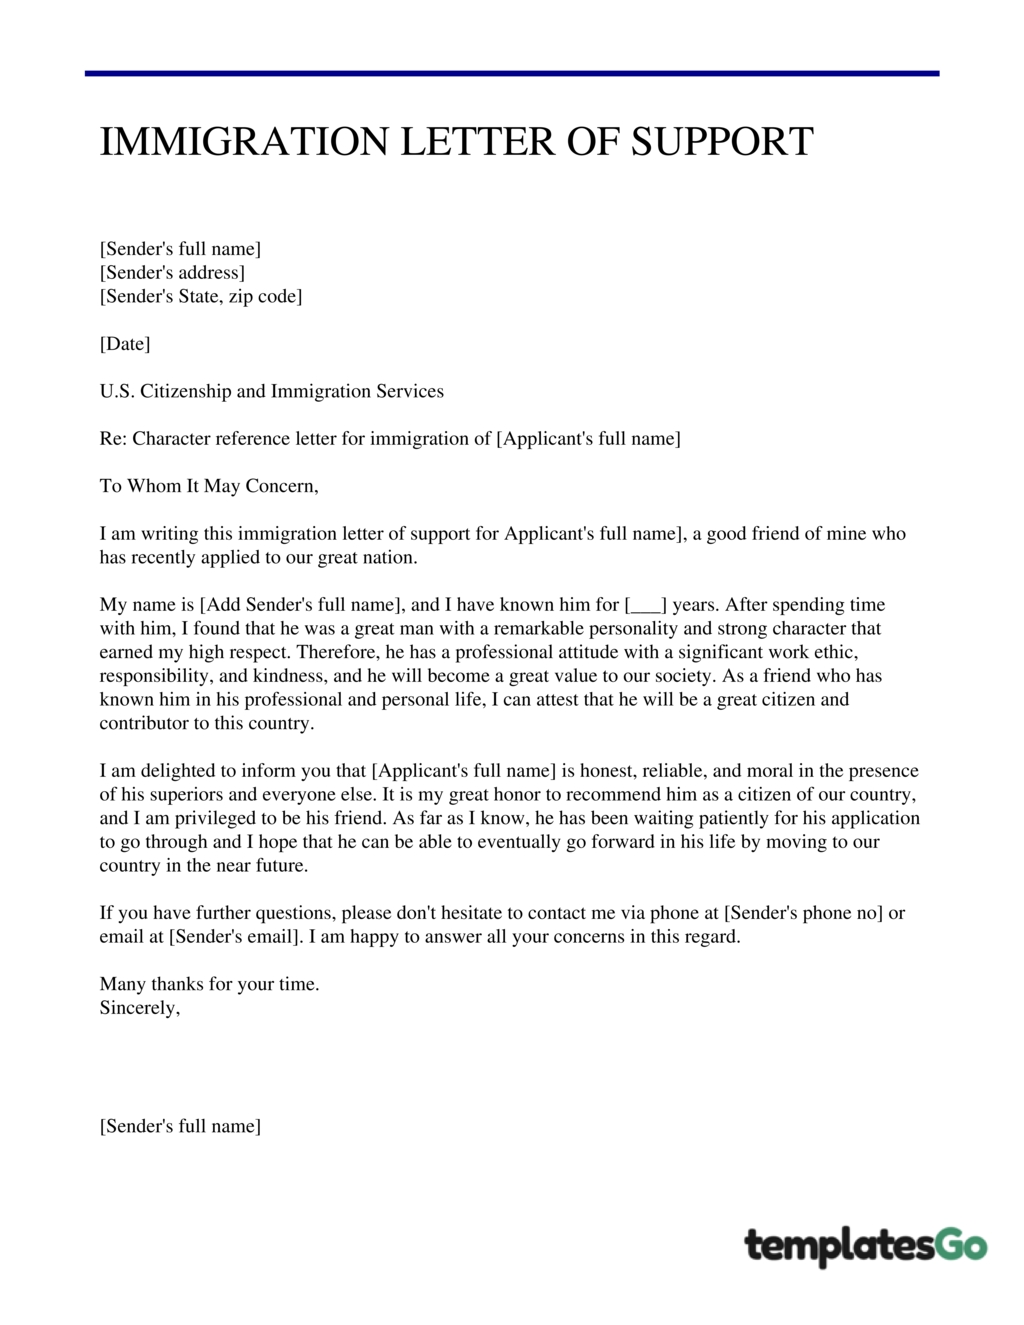 Immigration Letter Of Support 5 Templates To Edit Freely 3364